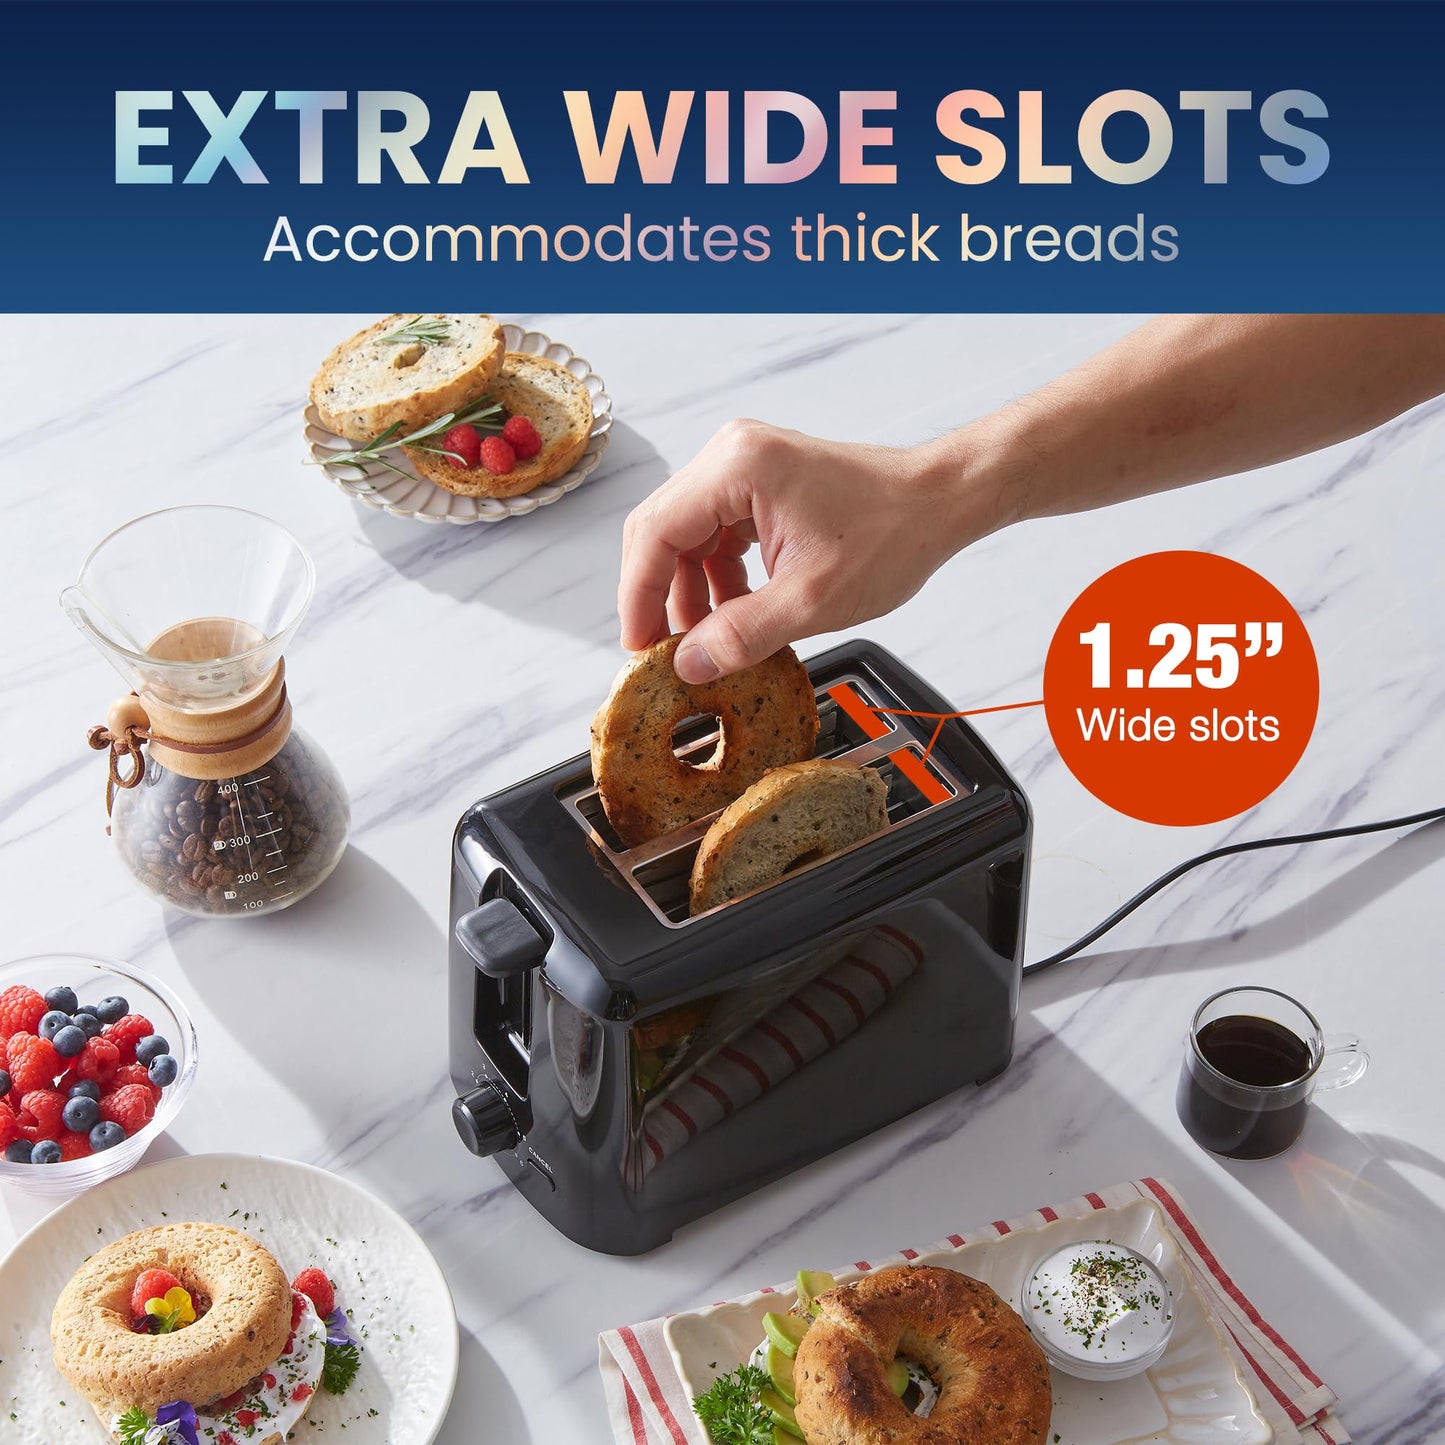 Elite Gourmet ECT1027B Cool Touch Toaster with 6 Temperature Settings & Extra Wide 1.25" Slots for Bagels, Waffles, Specialty Breads, Puff Pastry, Snacks, ETL Certified, 2 Slices, Black